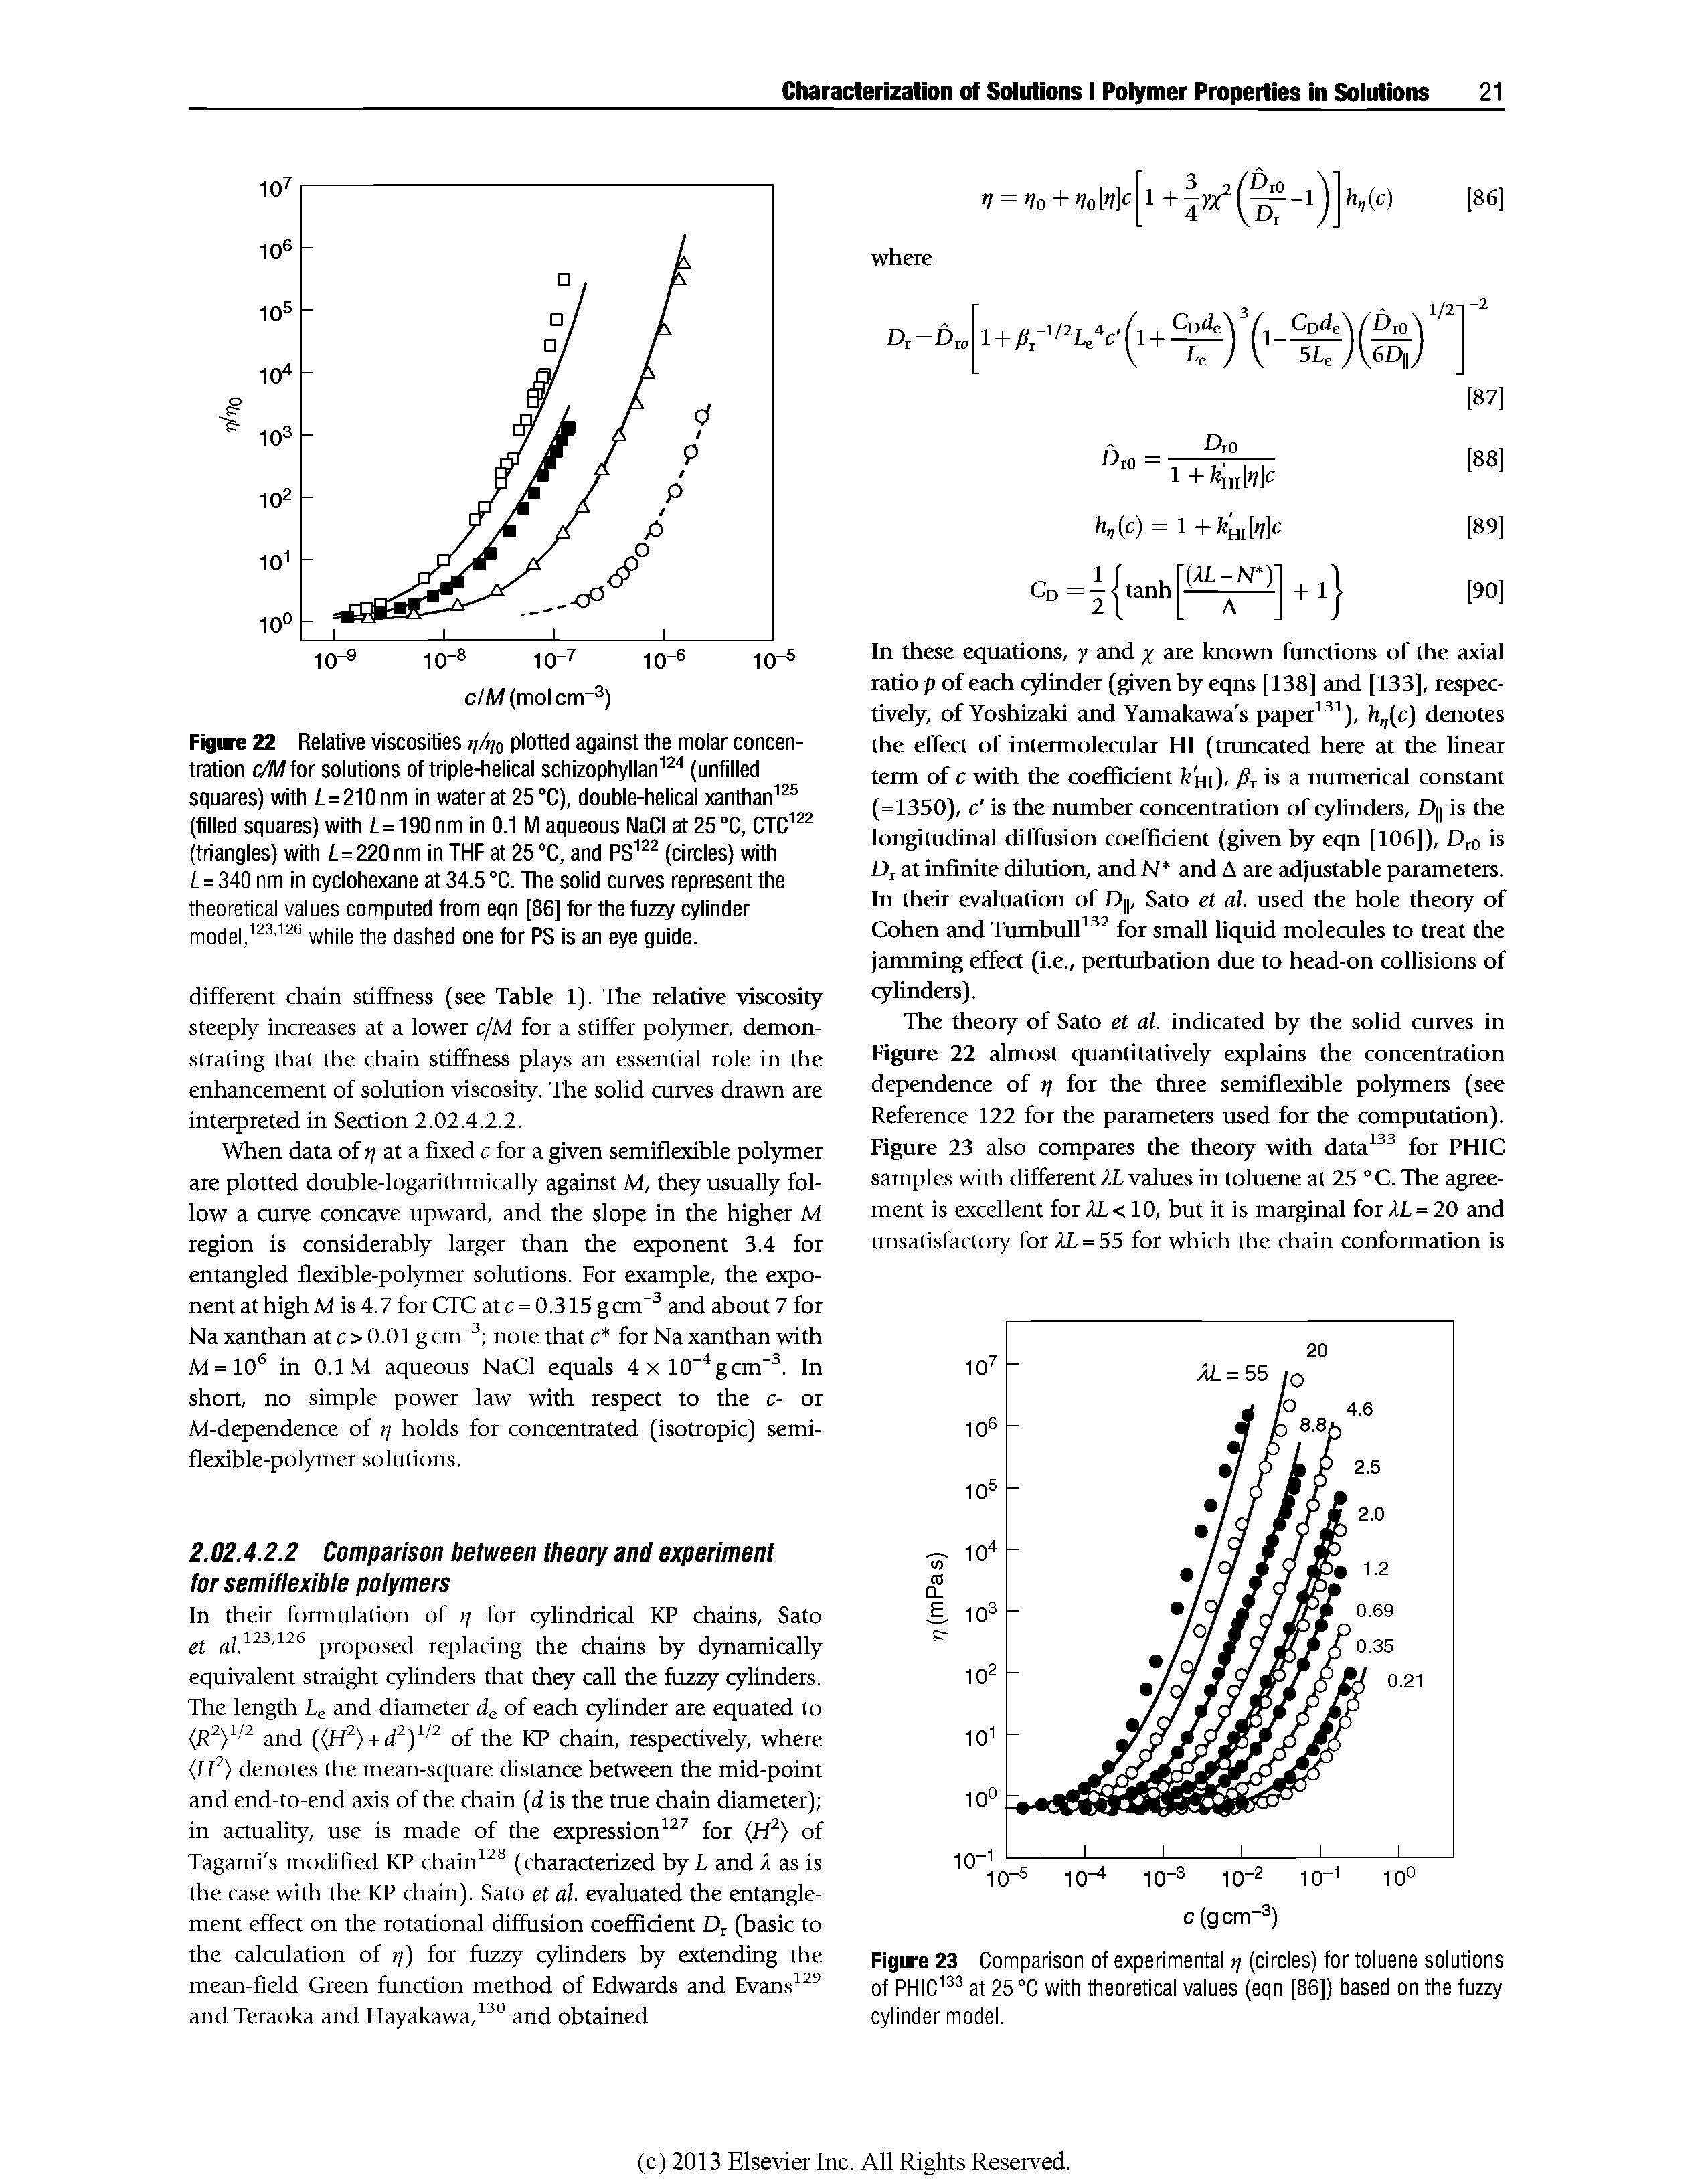 Figure 23 Comparison of experimental >) (circles) for toluene solutions of PHIC at 25 °C with theoretical values (eqn [86]) based on the fuzzy cylinder model.